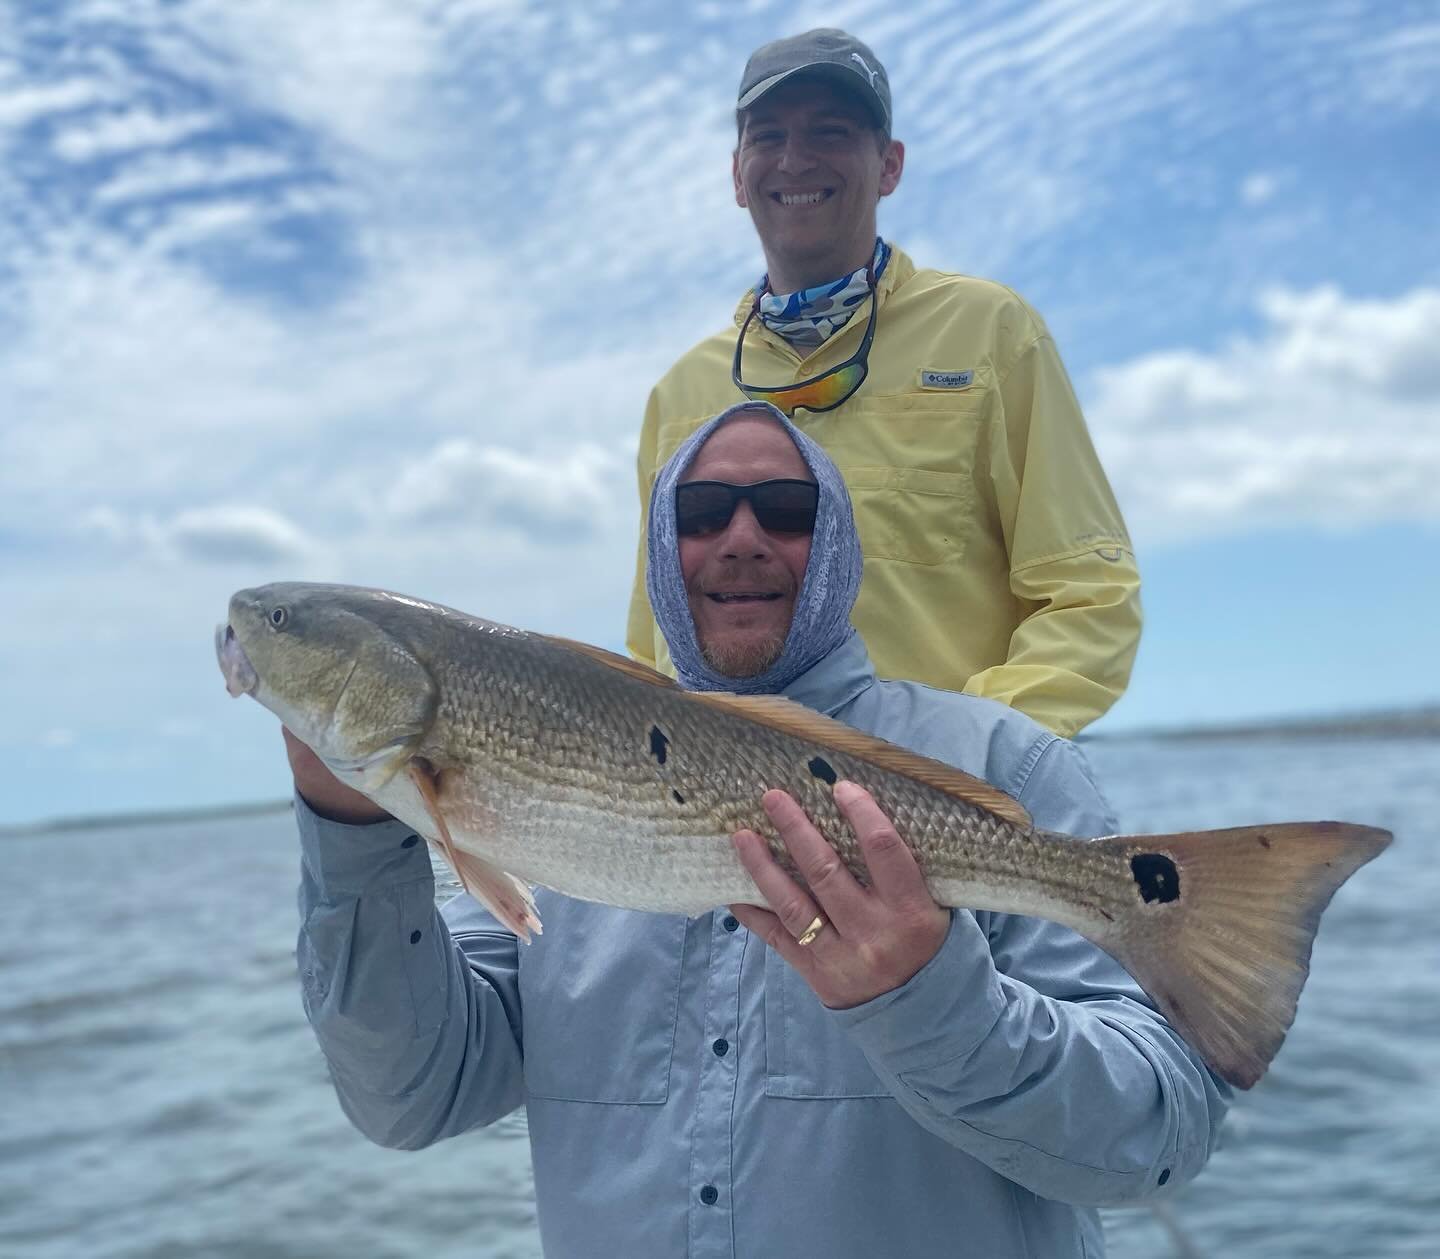 It was a first spot and last spot kinda day for Steve and Jacob. Black drum, flounder, reds, trout, mangroves and a surprise large whiting.